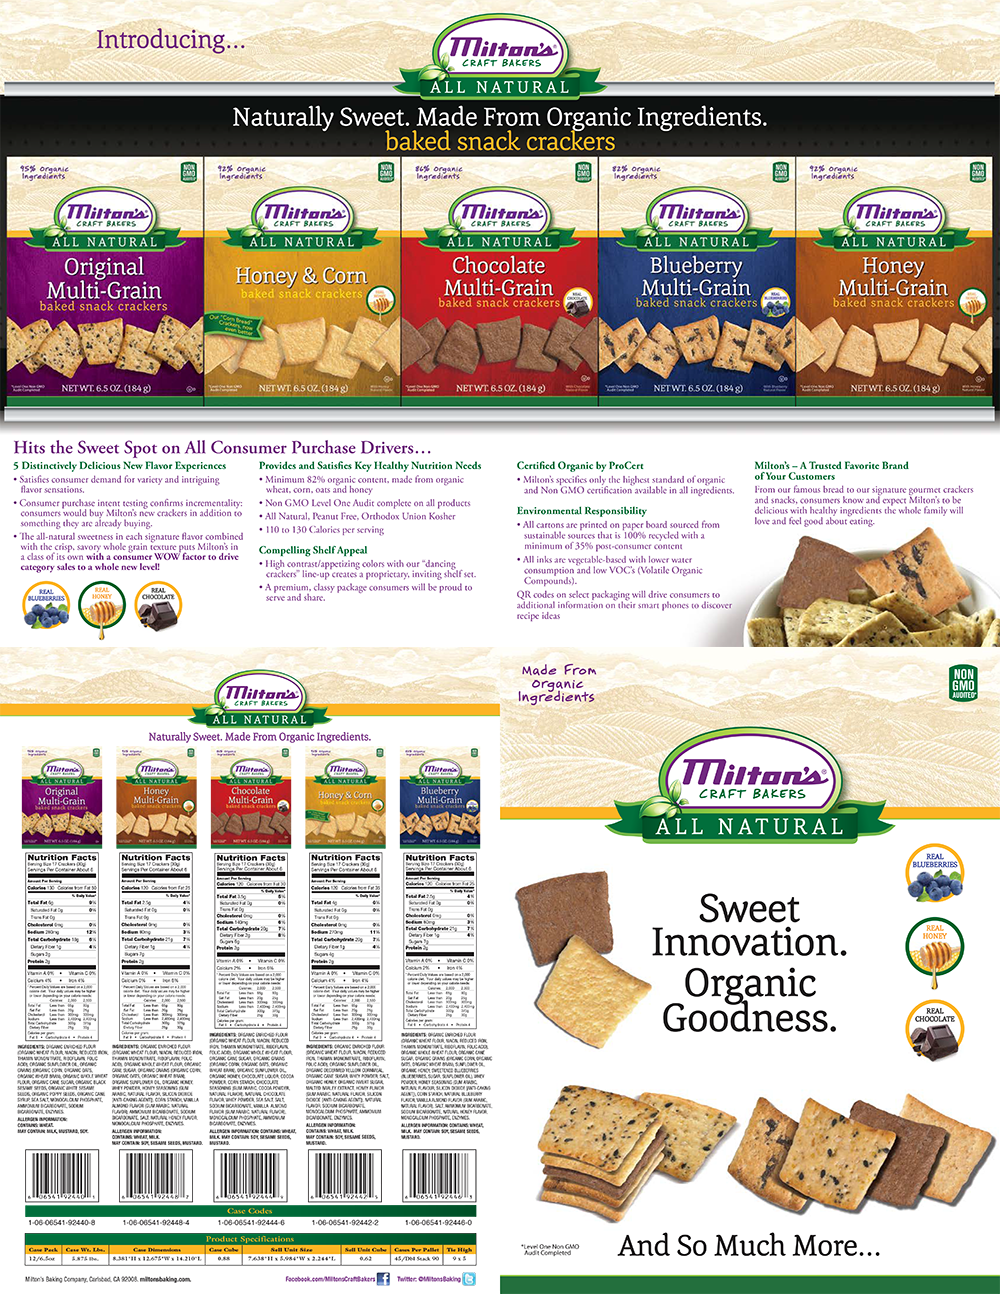 Milton's Craft Bakers' Sweet Crackers Product Introduction Case Study